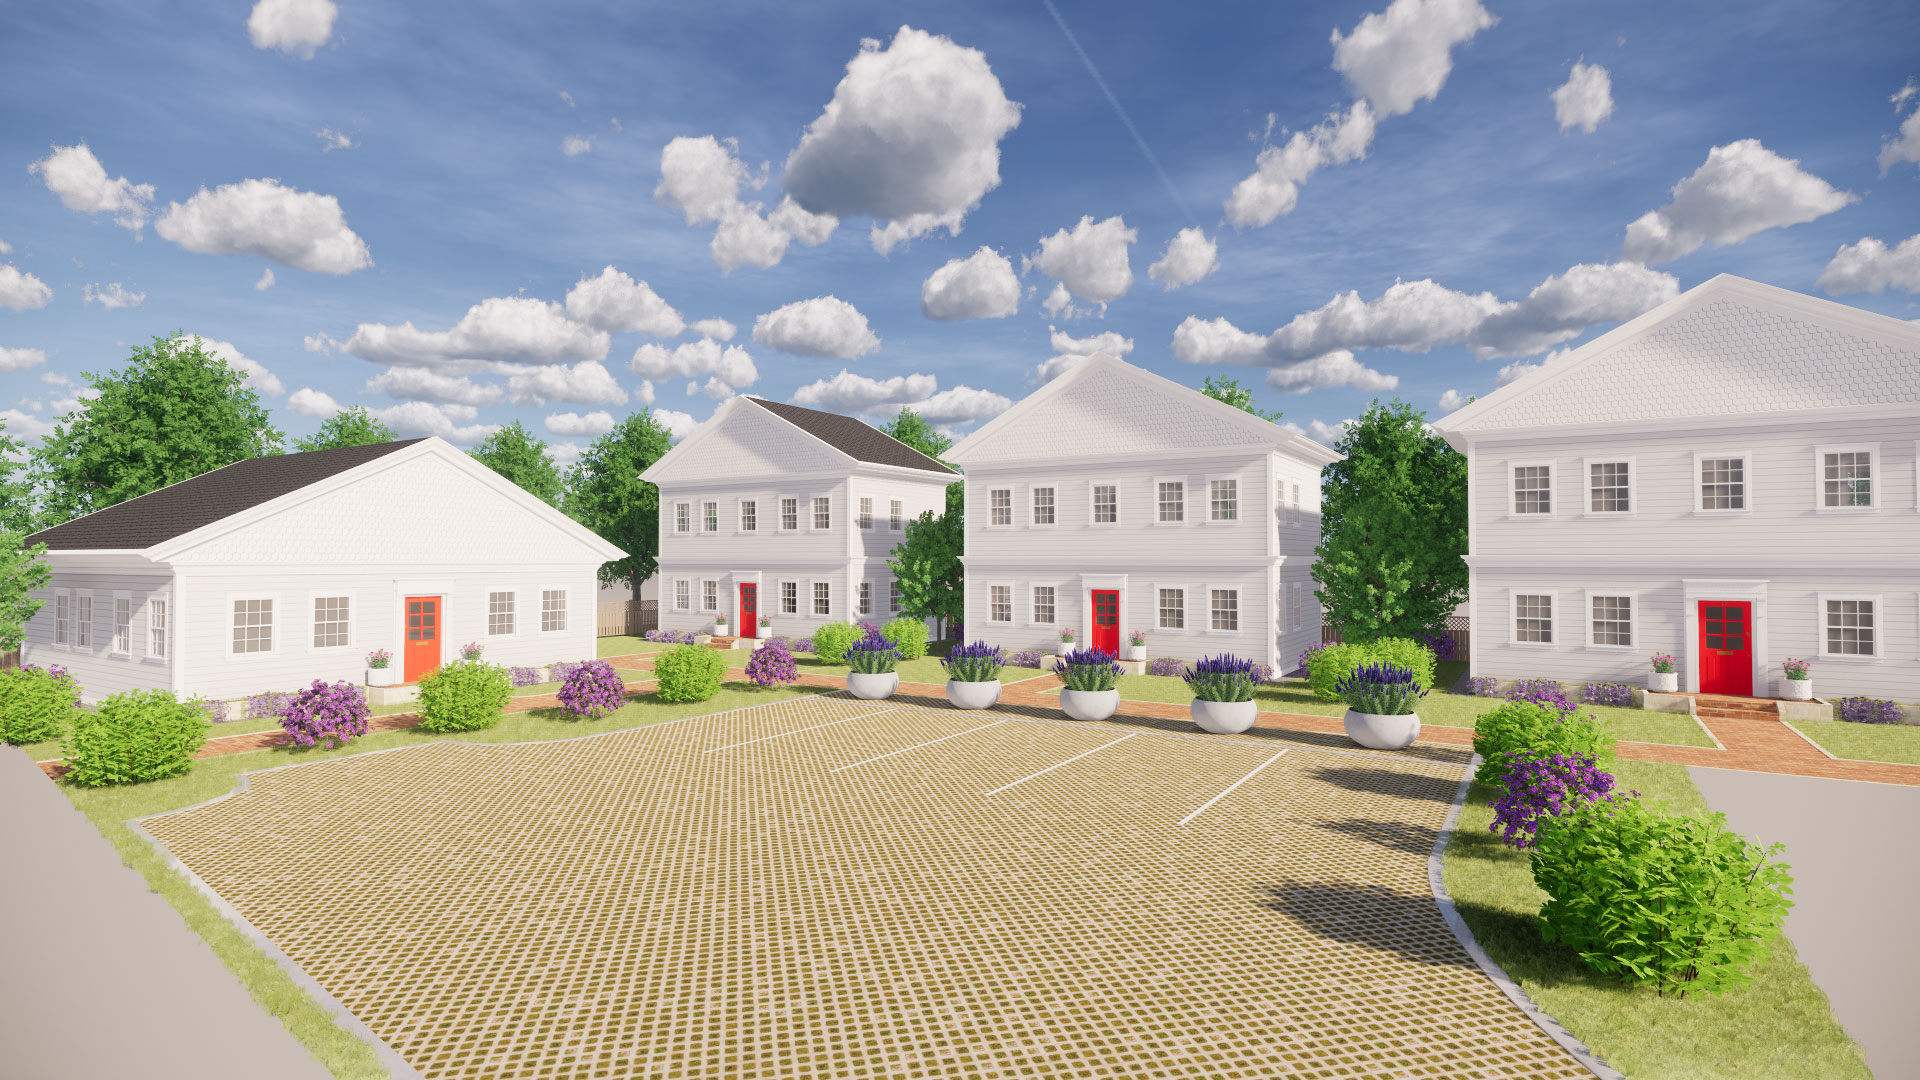 Exterior render of several two story colonial style homes along brick pathway and parking lot perimetered with bushes.